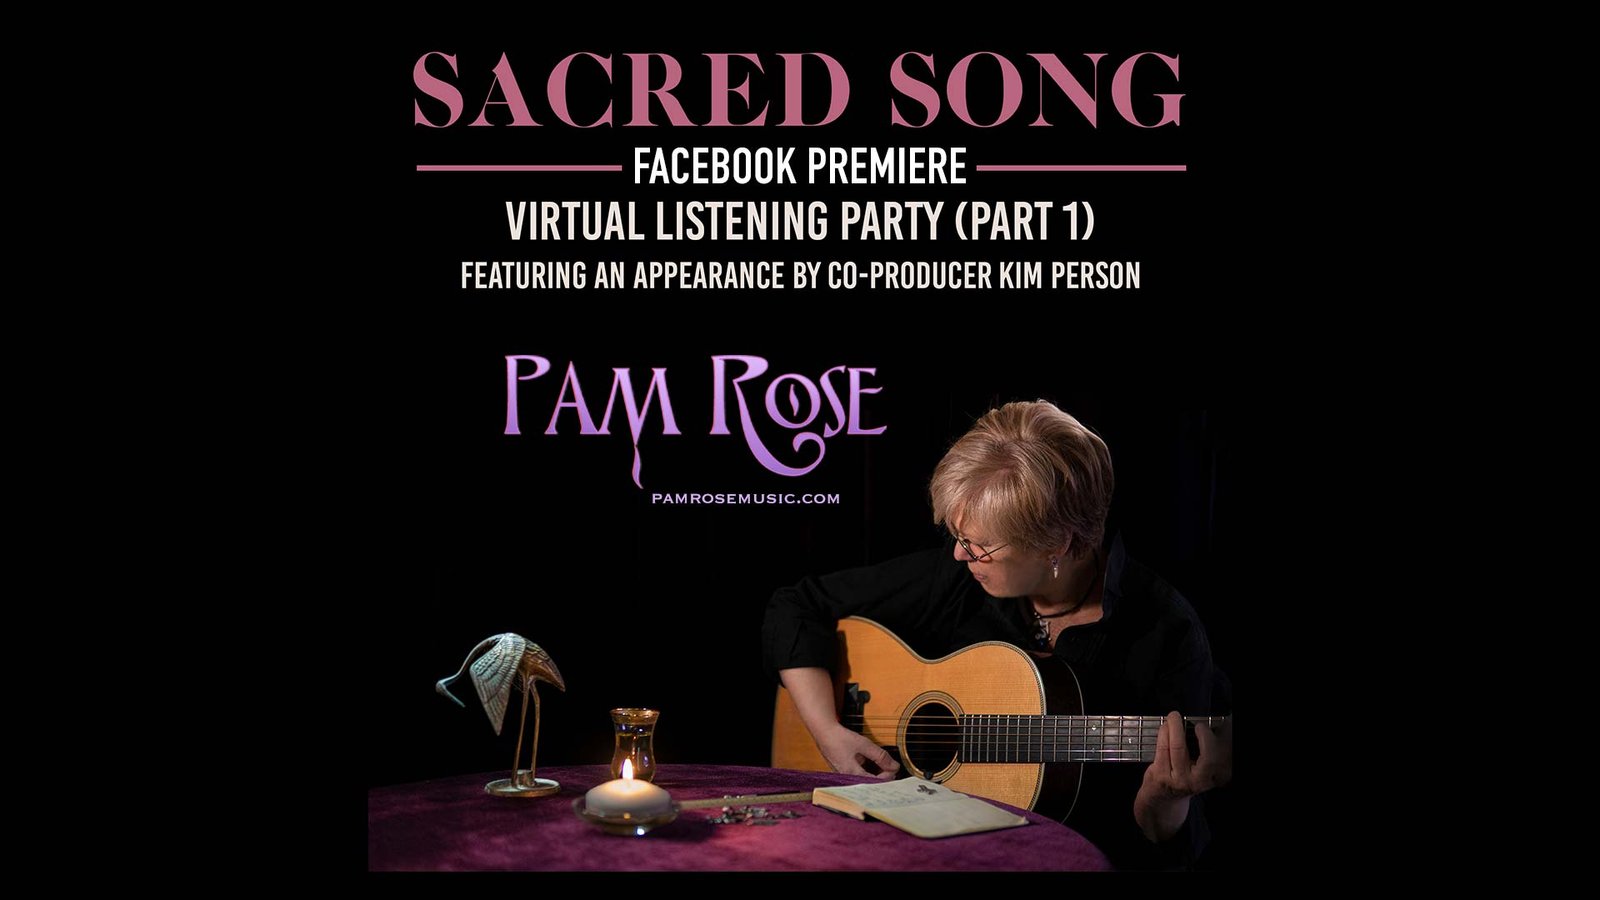 Pam Rose “Sacred Song” Premiere and Virtual Listening Party – Part 1 (Facebook Live)